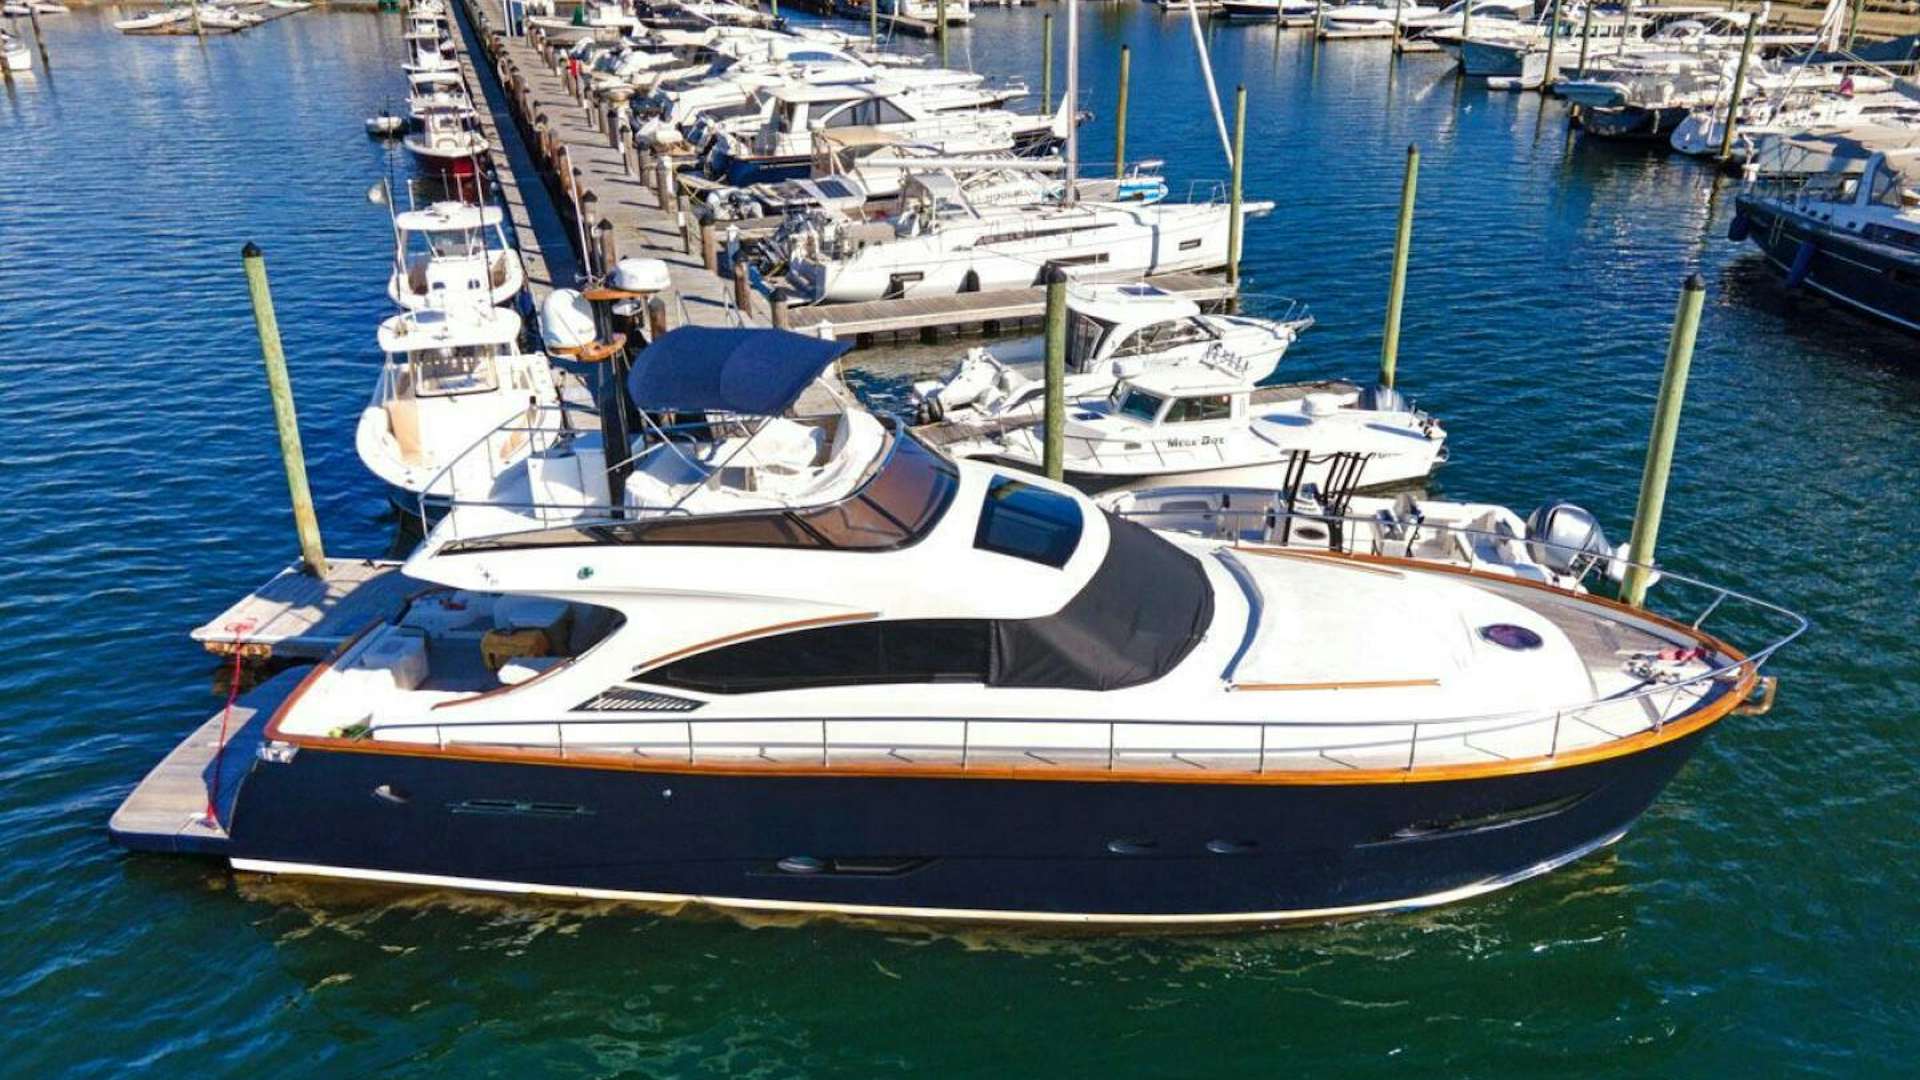 Ketel two
Yacht for Sale